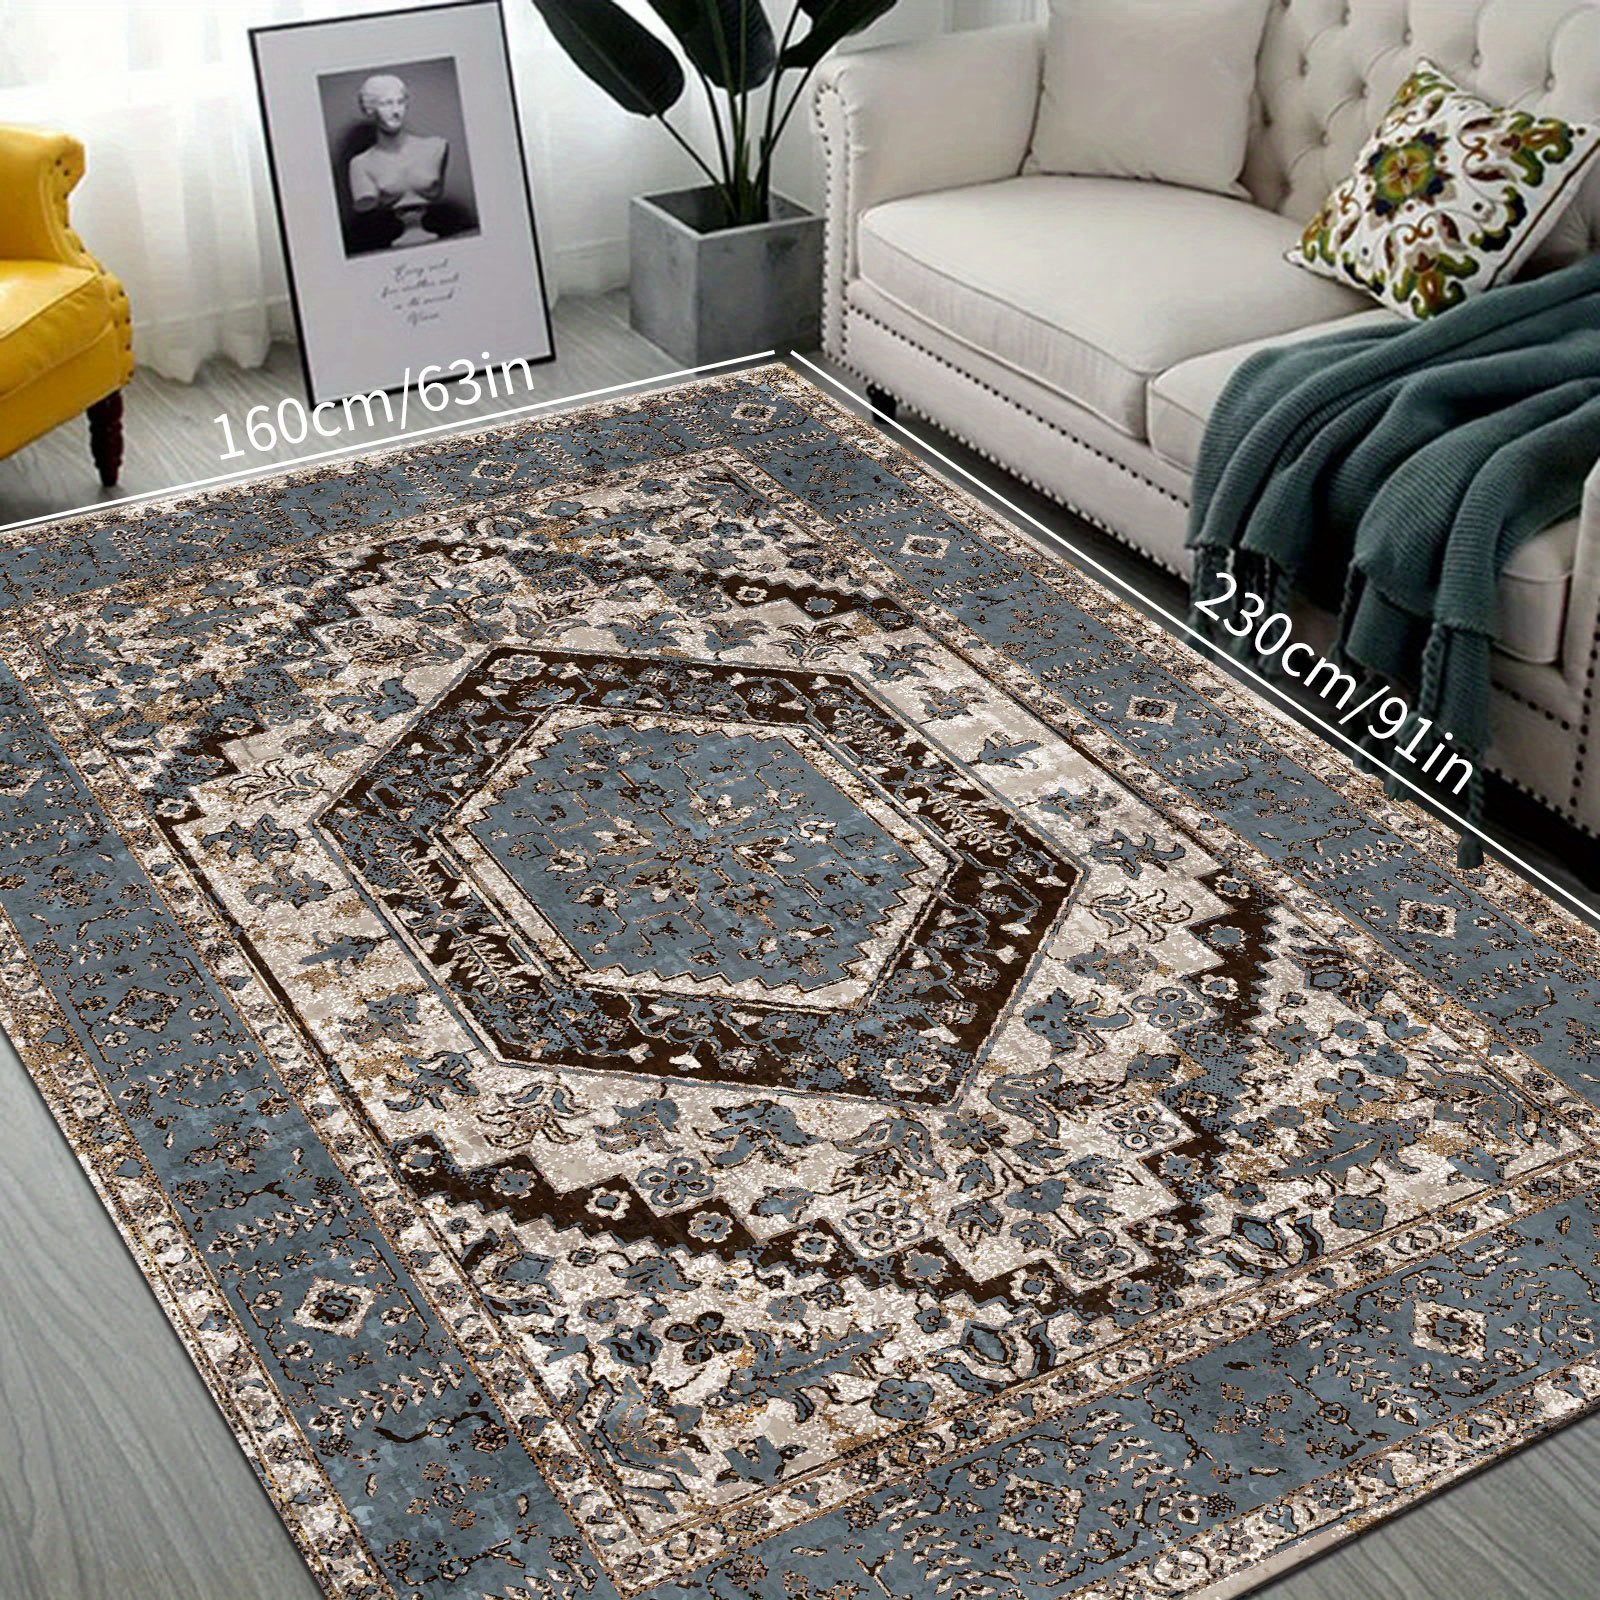 1pc Luxury Moroccan Vintage Boho Persian Carpet - Non-Shedding Ethnic Style  Rug for Living Room, Bedroom, Coffee Table, Dining Room, Machine Washable